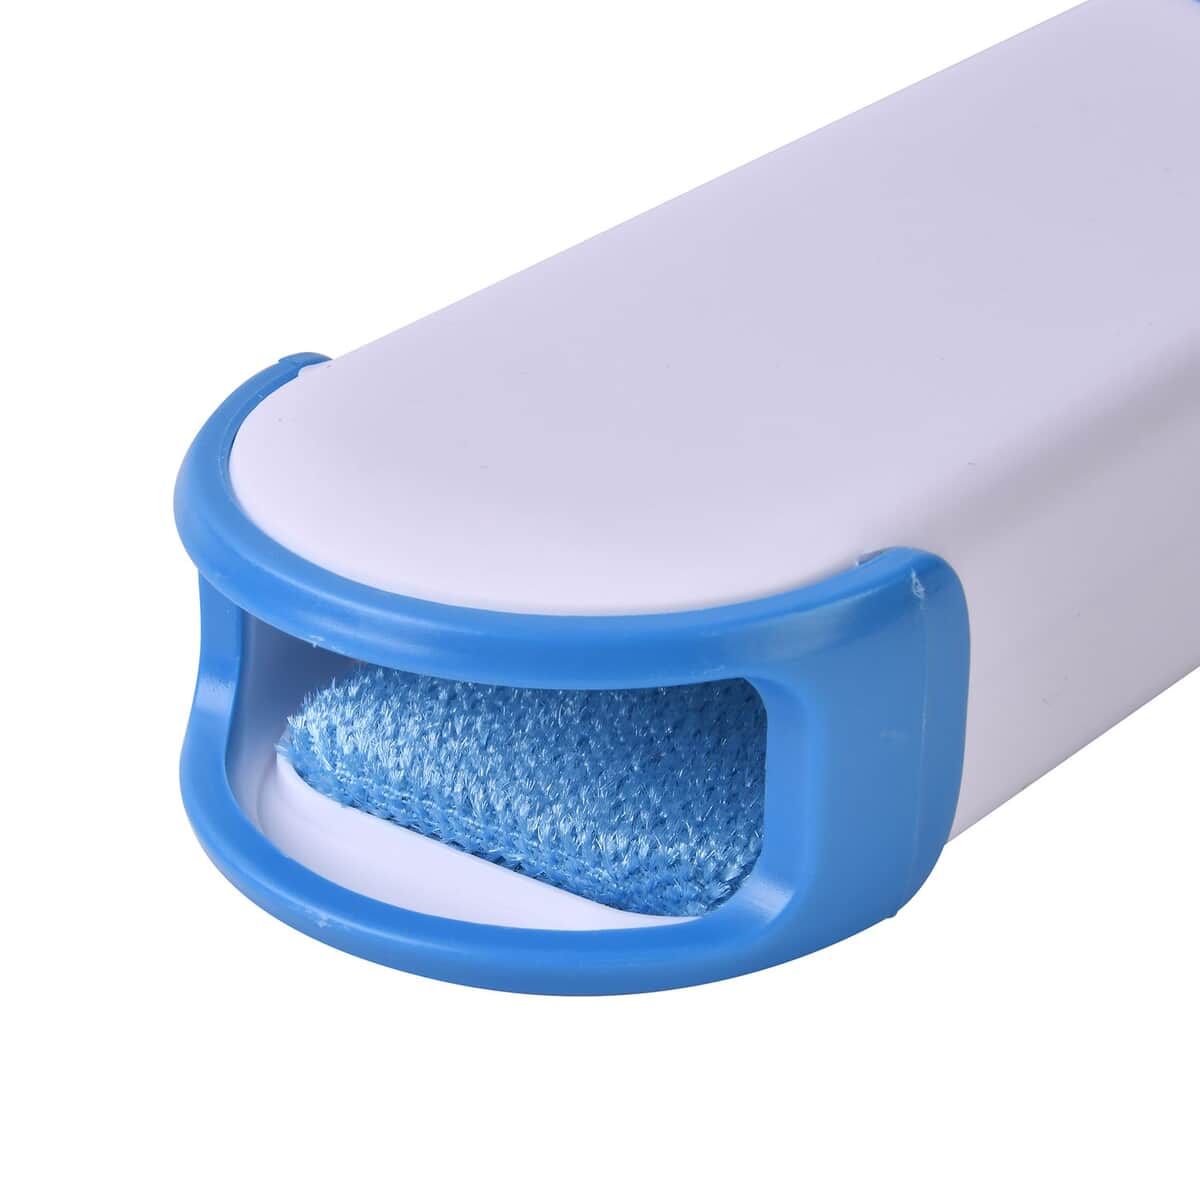 Set of 2 Blue Double Sided Cleaning Brush (3.54"x1.57"x12.6") & (2.16"x0.98"x5.51") image number 6